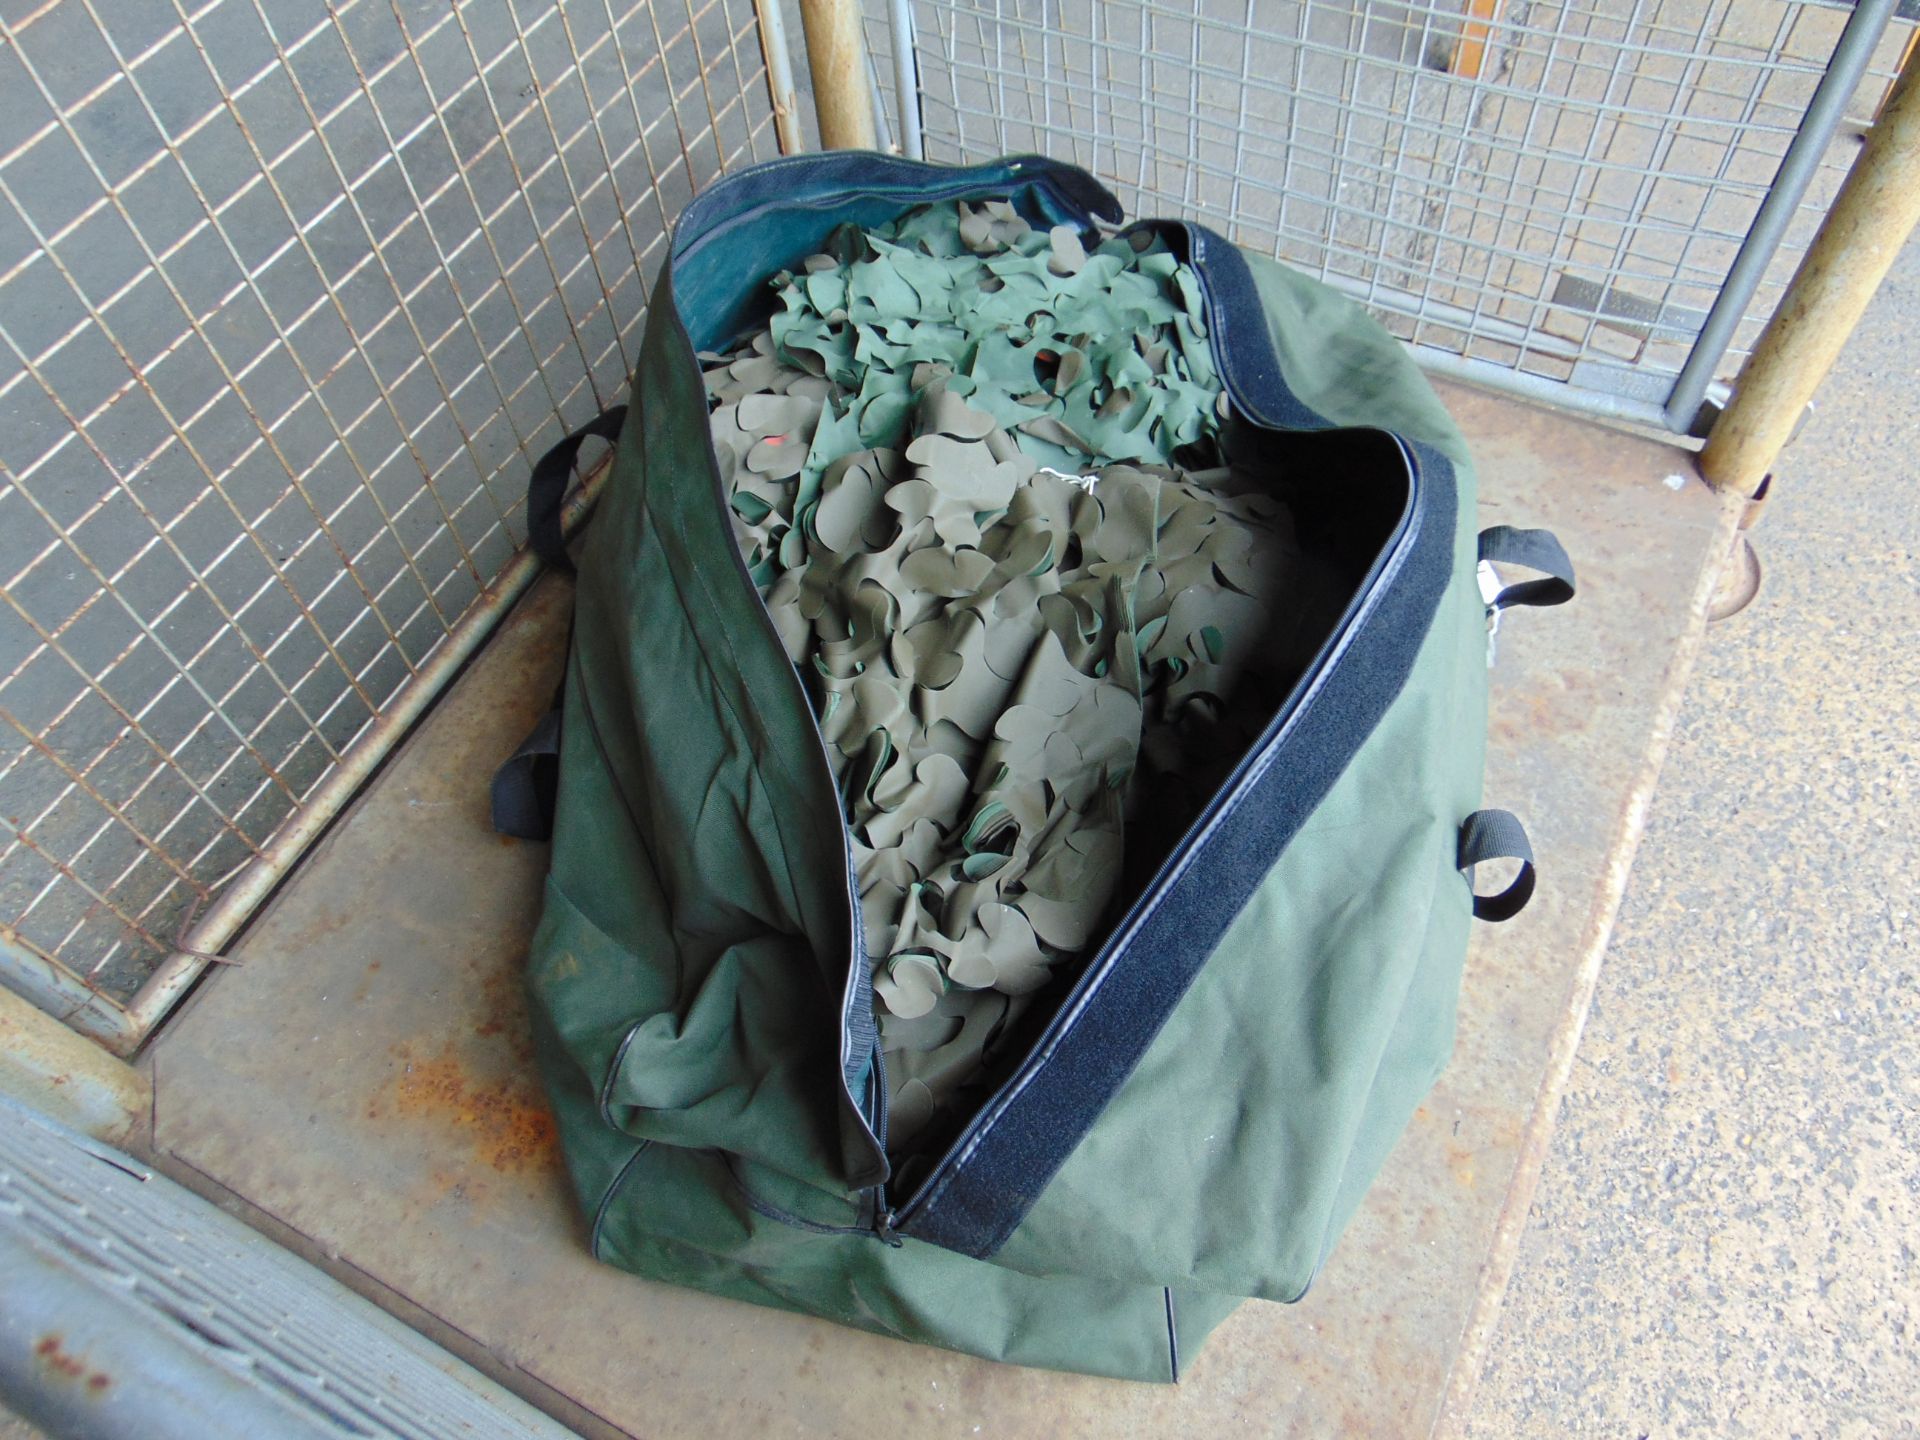 Camouflage Netting in Zipper Sack - Image 2 of 3